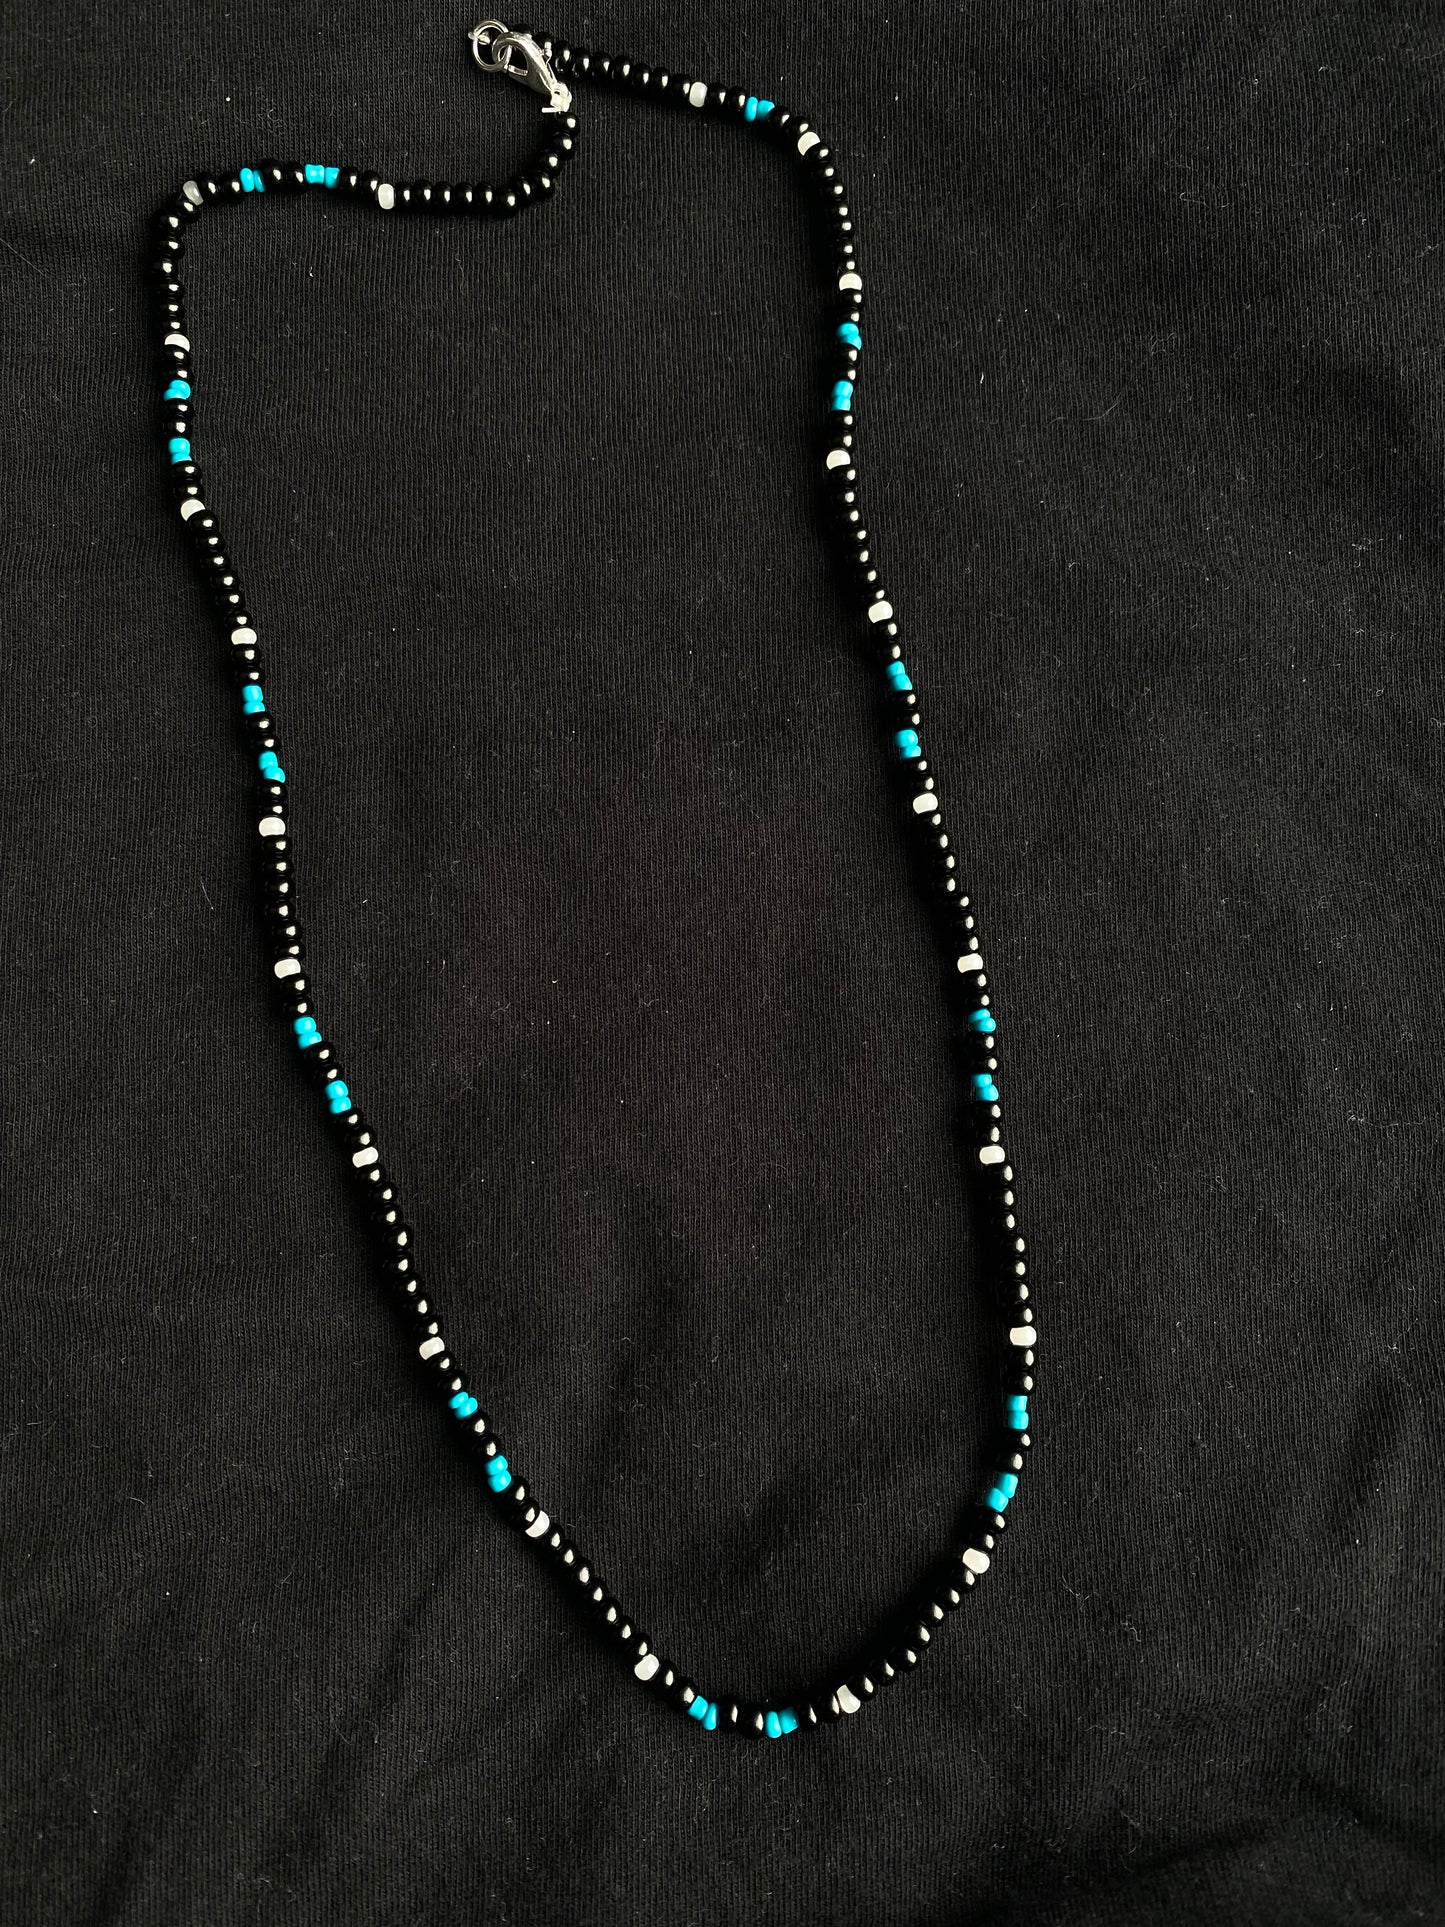 Black and Blue M Necklace